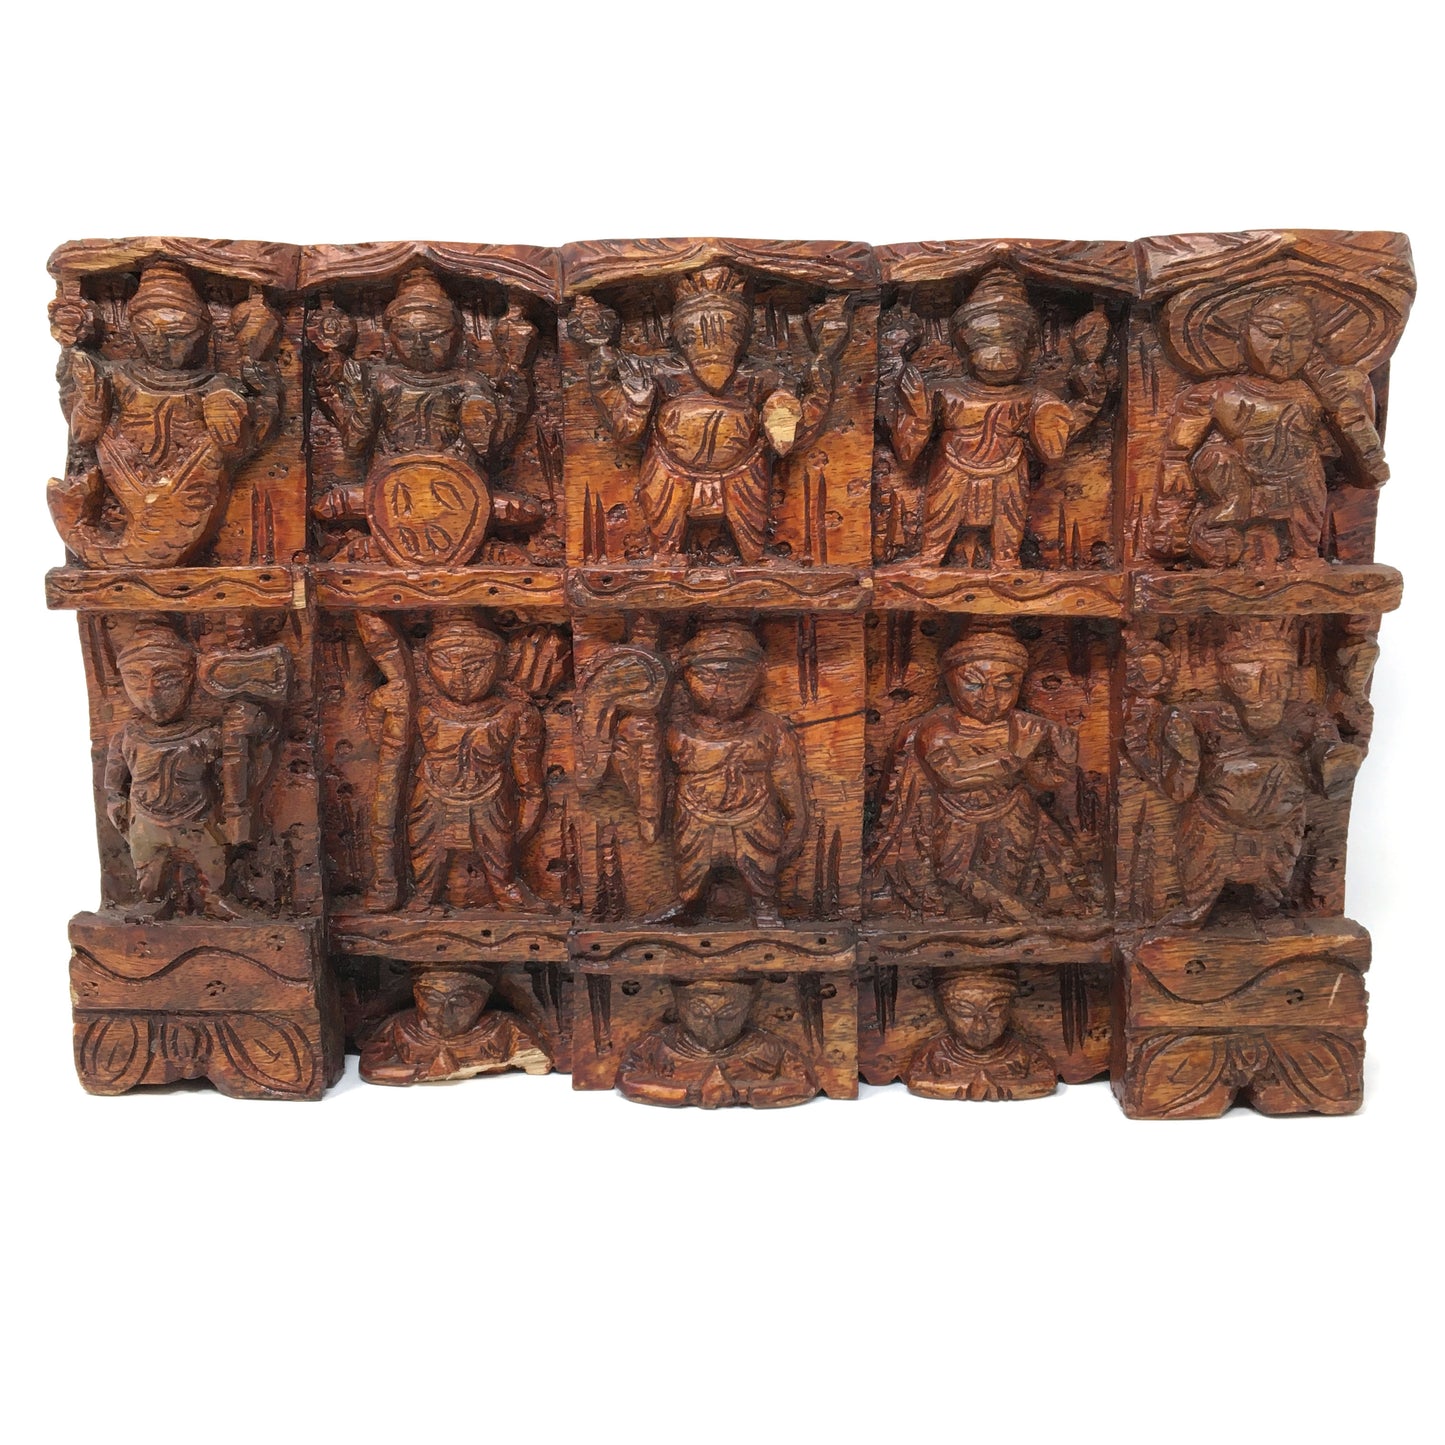 Hand-carved Solid Wood Wall Hanging Panel Plaque Carved Krishna Incarnations